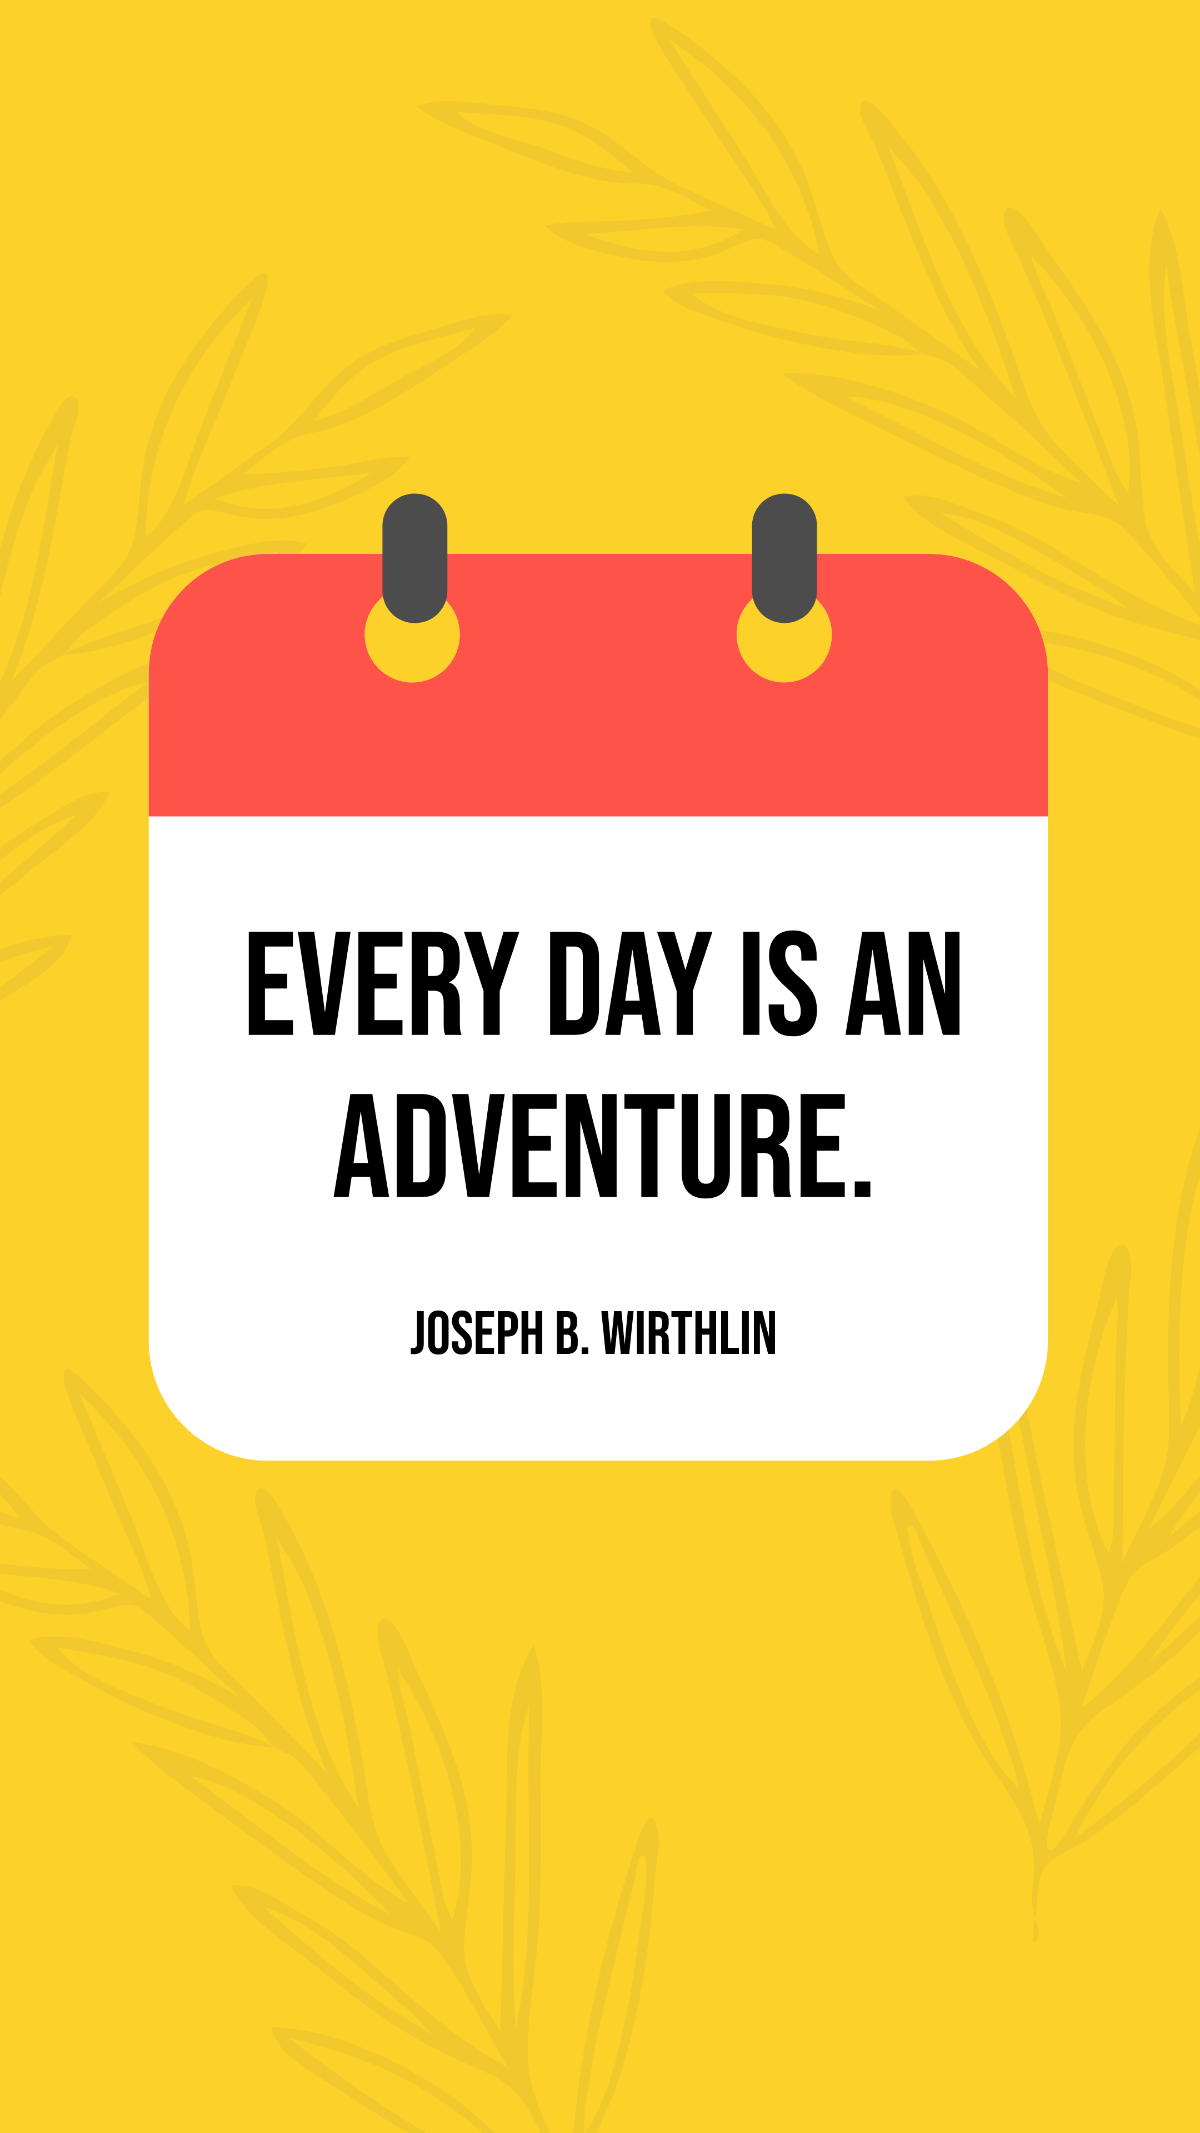 Joseph B. Wirthlin - Every day is an adventure. Template